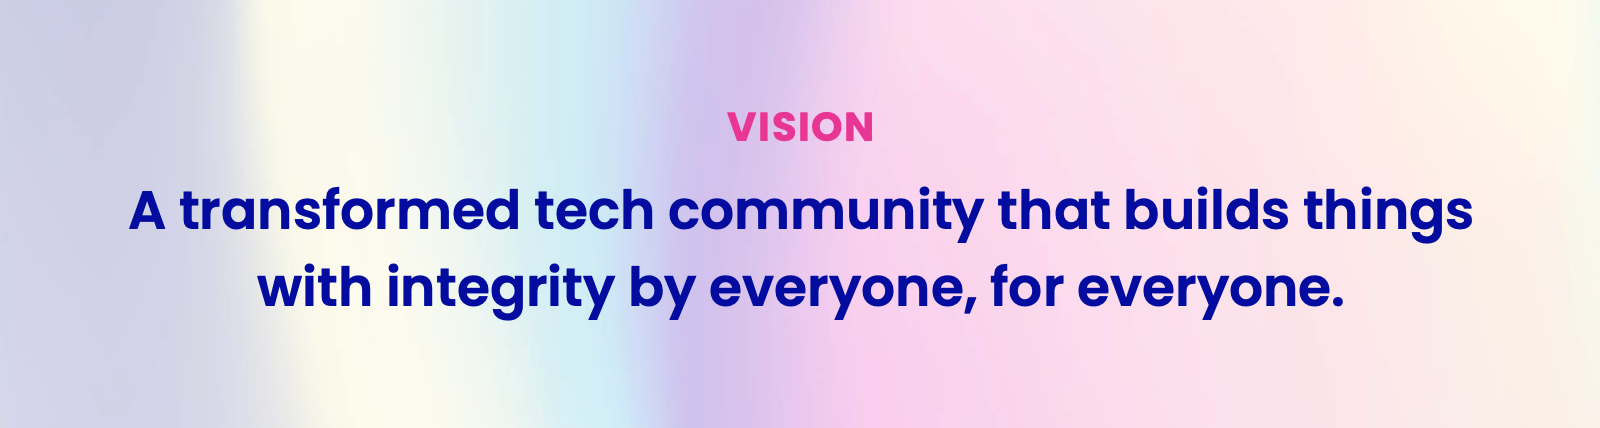 Bridge Vision: A transformed tech community that builds things with integrity by everyone, for everyone.